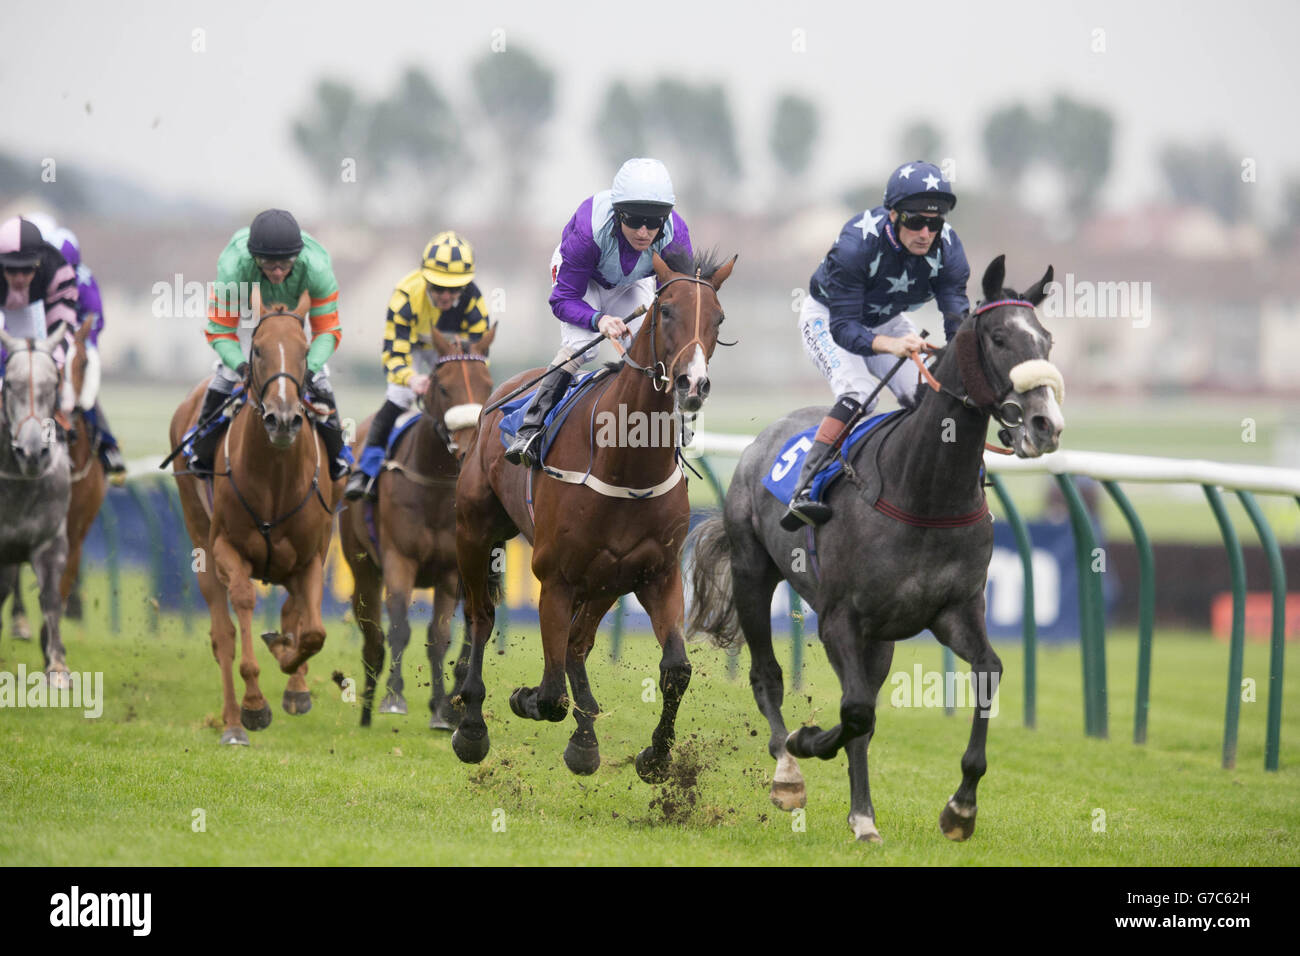 Trinity Star ridden by Paul Mulrennan (right) wins the Enterprise Screen 10 Years of Video Handicap during day two of the 2014 William Hill Ayr Gold Cup Festival at Ayr Racecourse, Ayr. Stock Photo